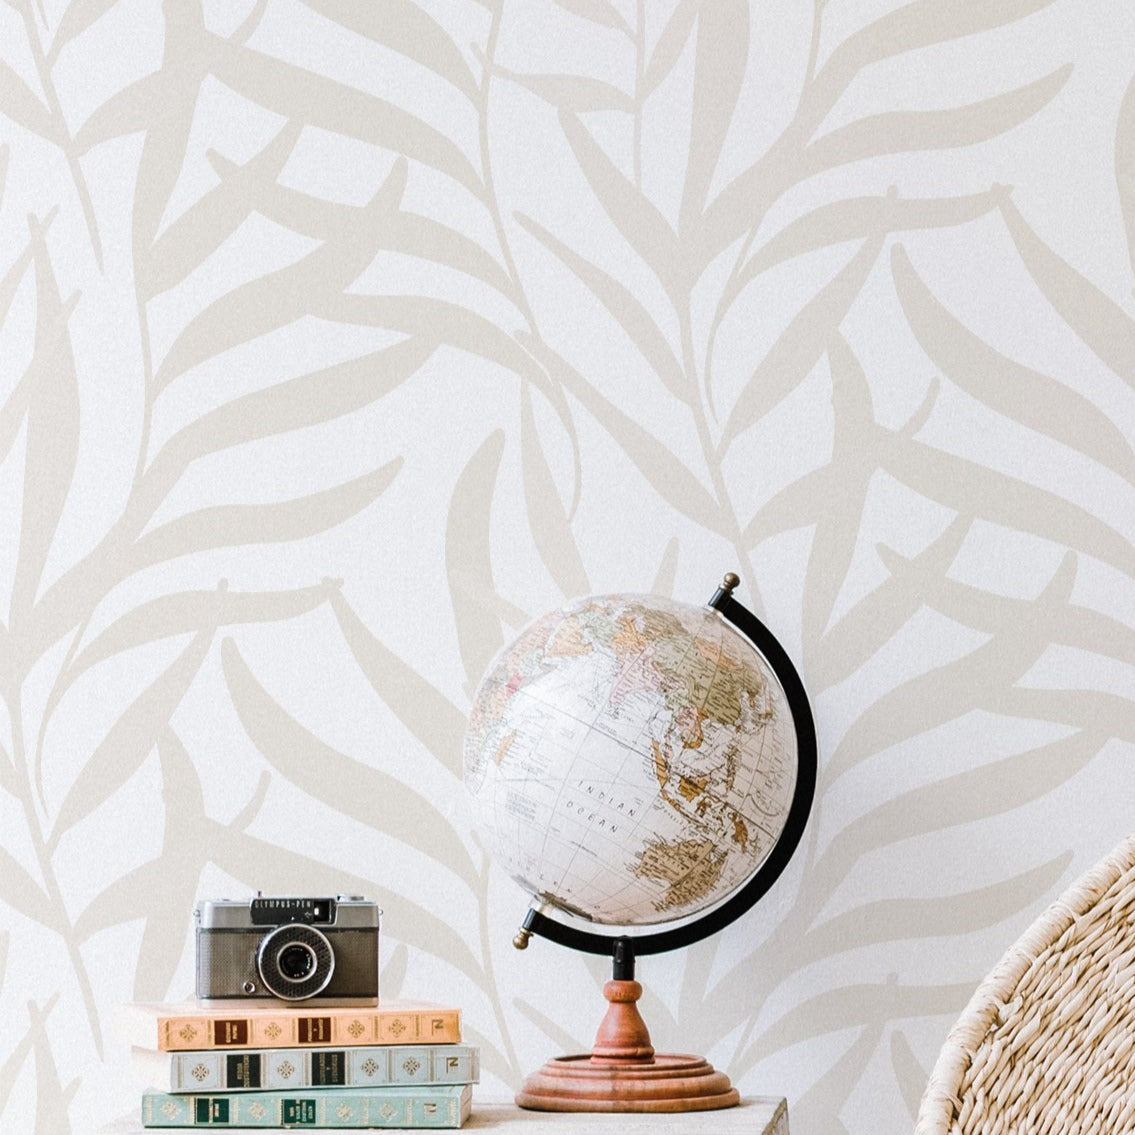 A cozy corner of a room featuring a globe on a wooden stand, placed atop a stack of decorative books beside a vintage camera. The backdrop is a neutral-toned wall adorned with a subtle, leafy 'Earthy Wallpaper' pattern, creating a tranquil and cultured ambiance.